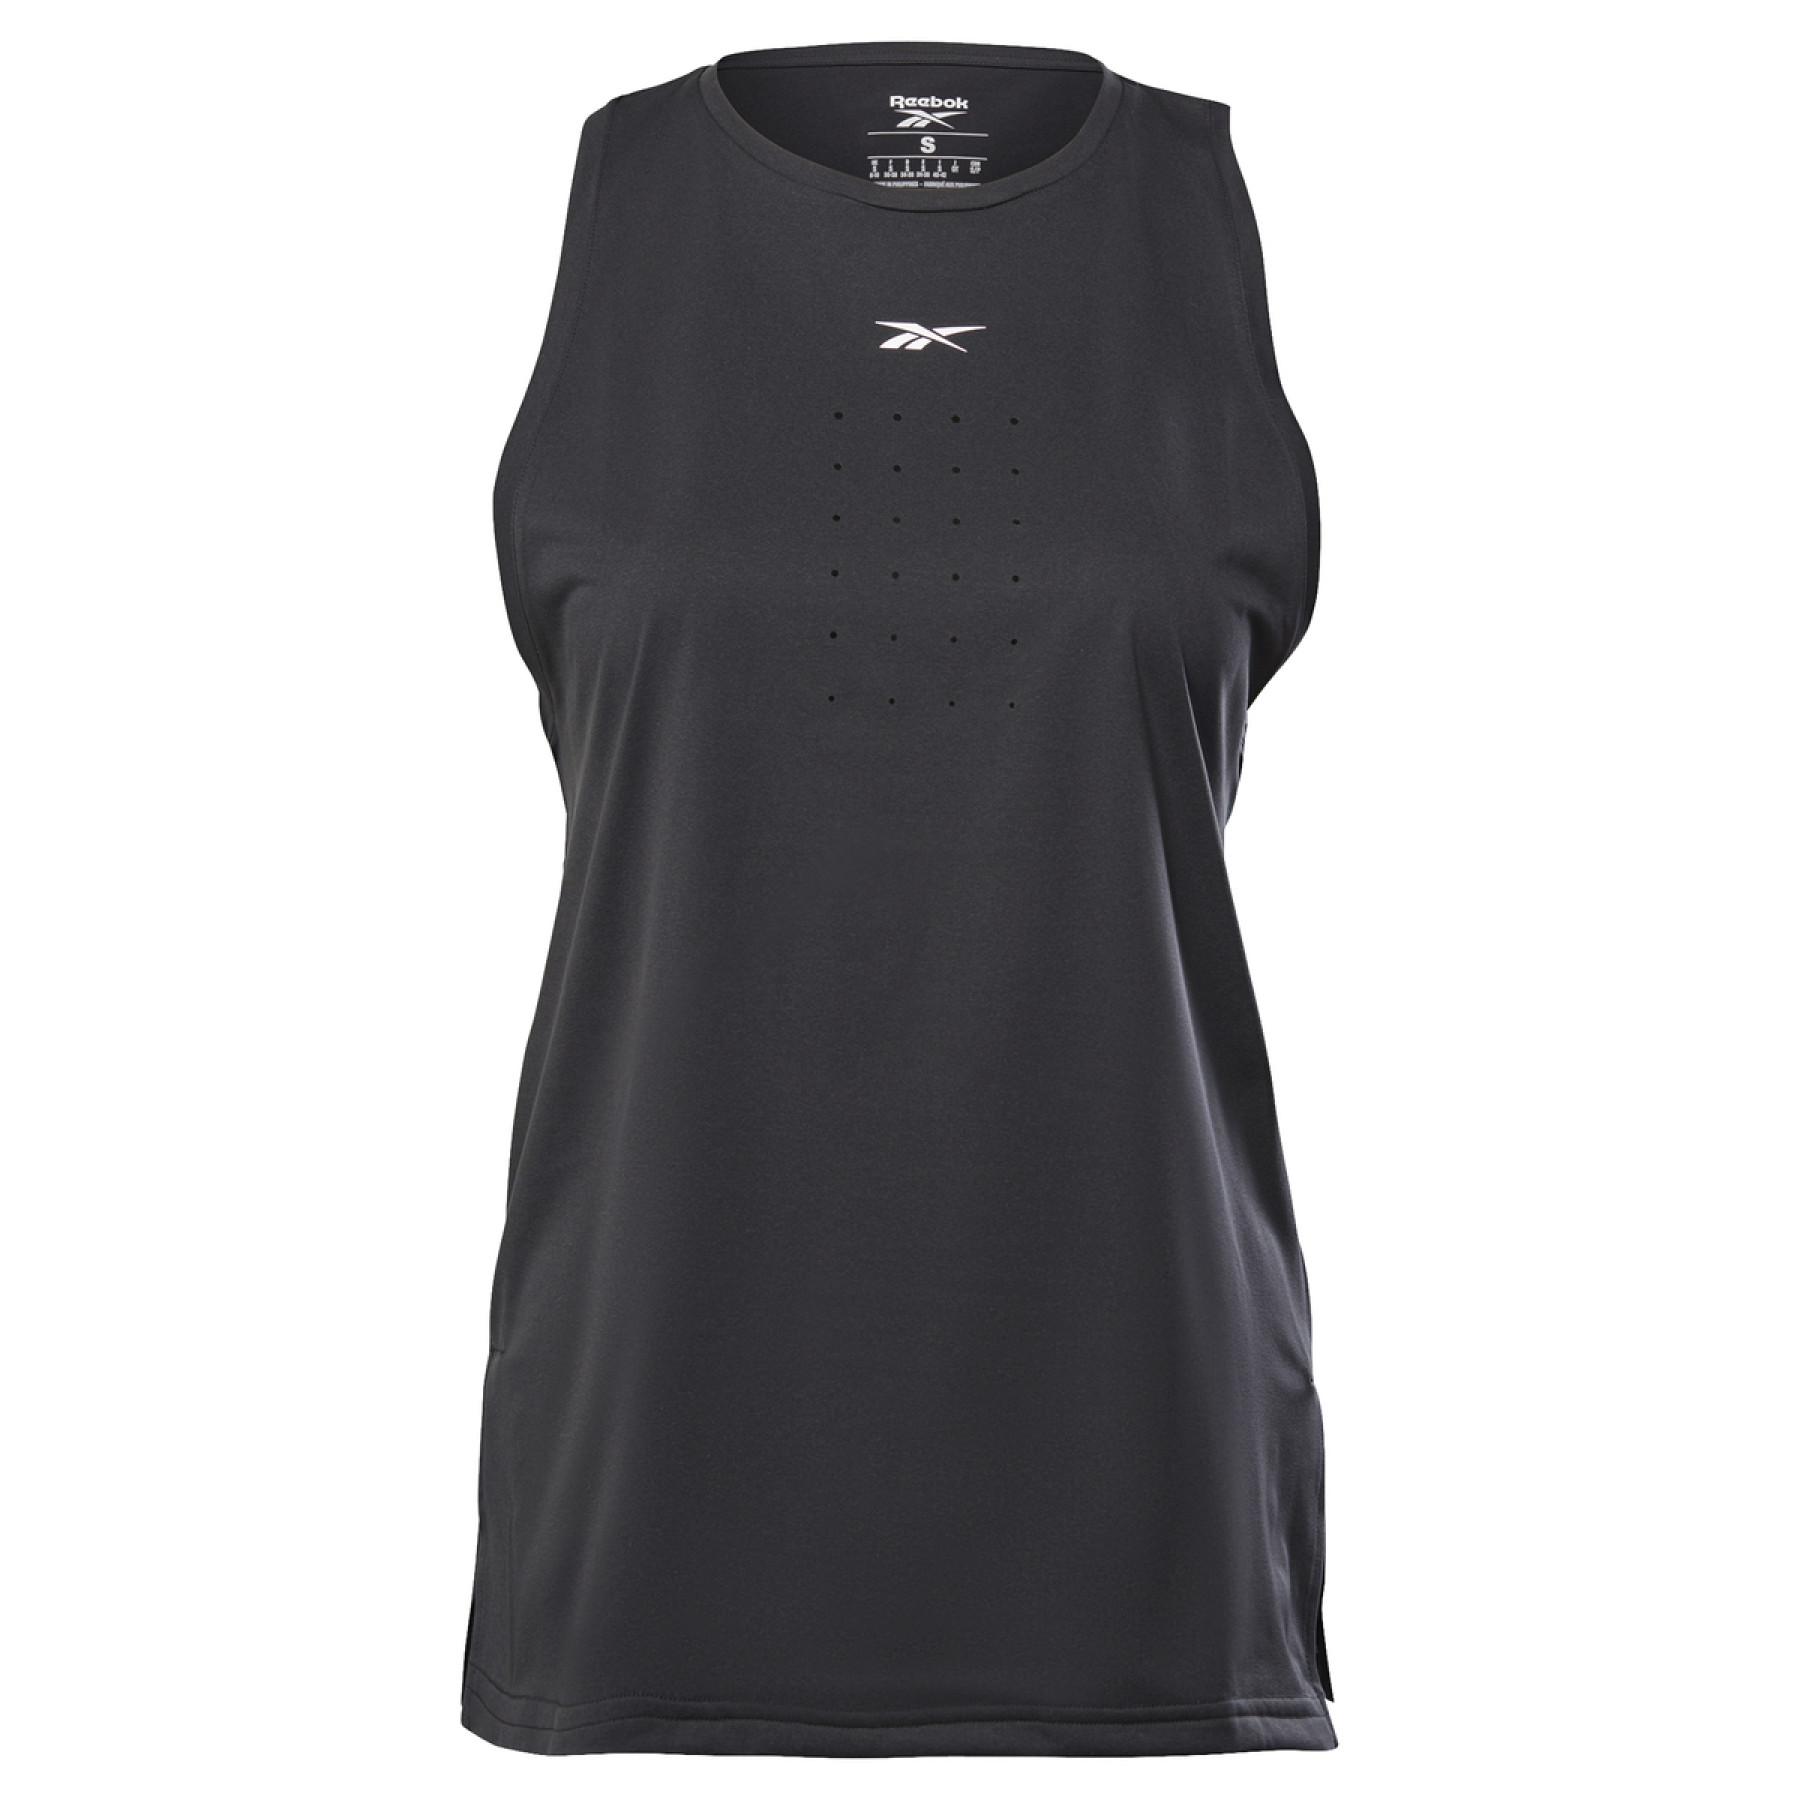 Canotta da donna Reebok United By Fitness Perforated